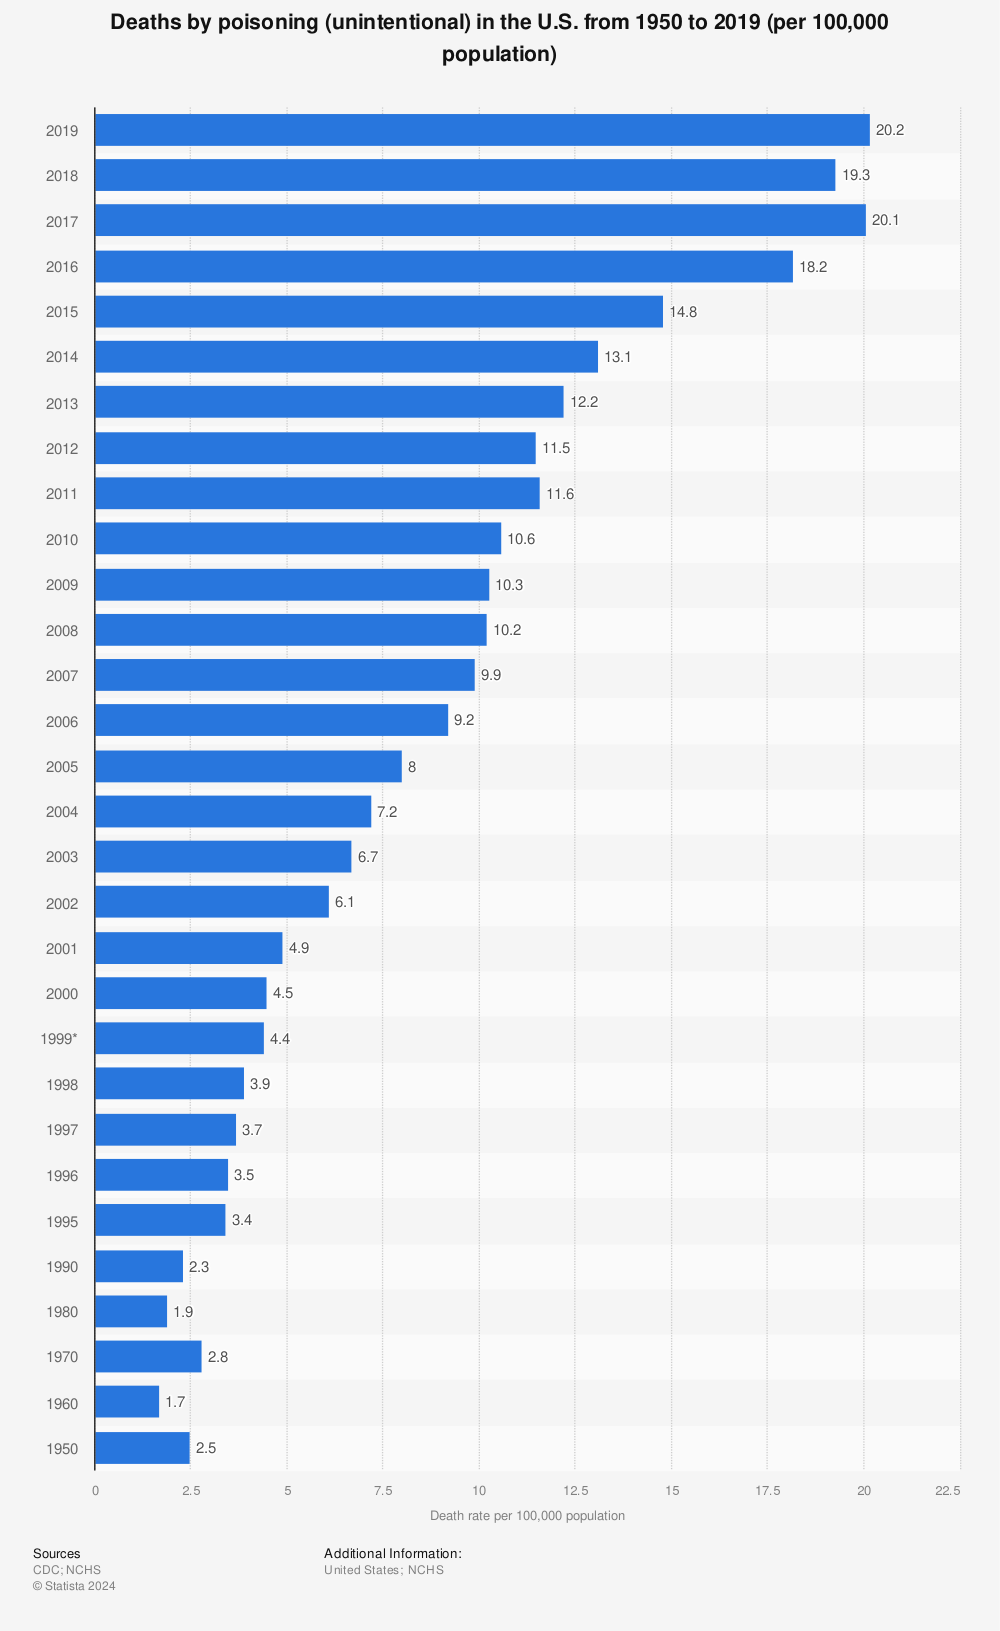 Statistic: Deaths by poisoning (unintentional) in the U.S. from 1950 to 2019 (per 100,000 population) | Statista